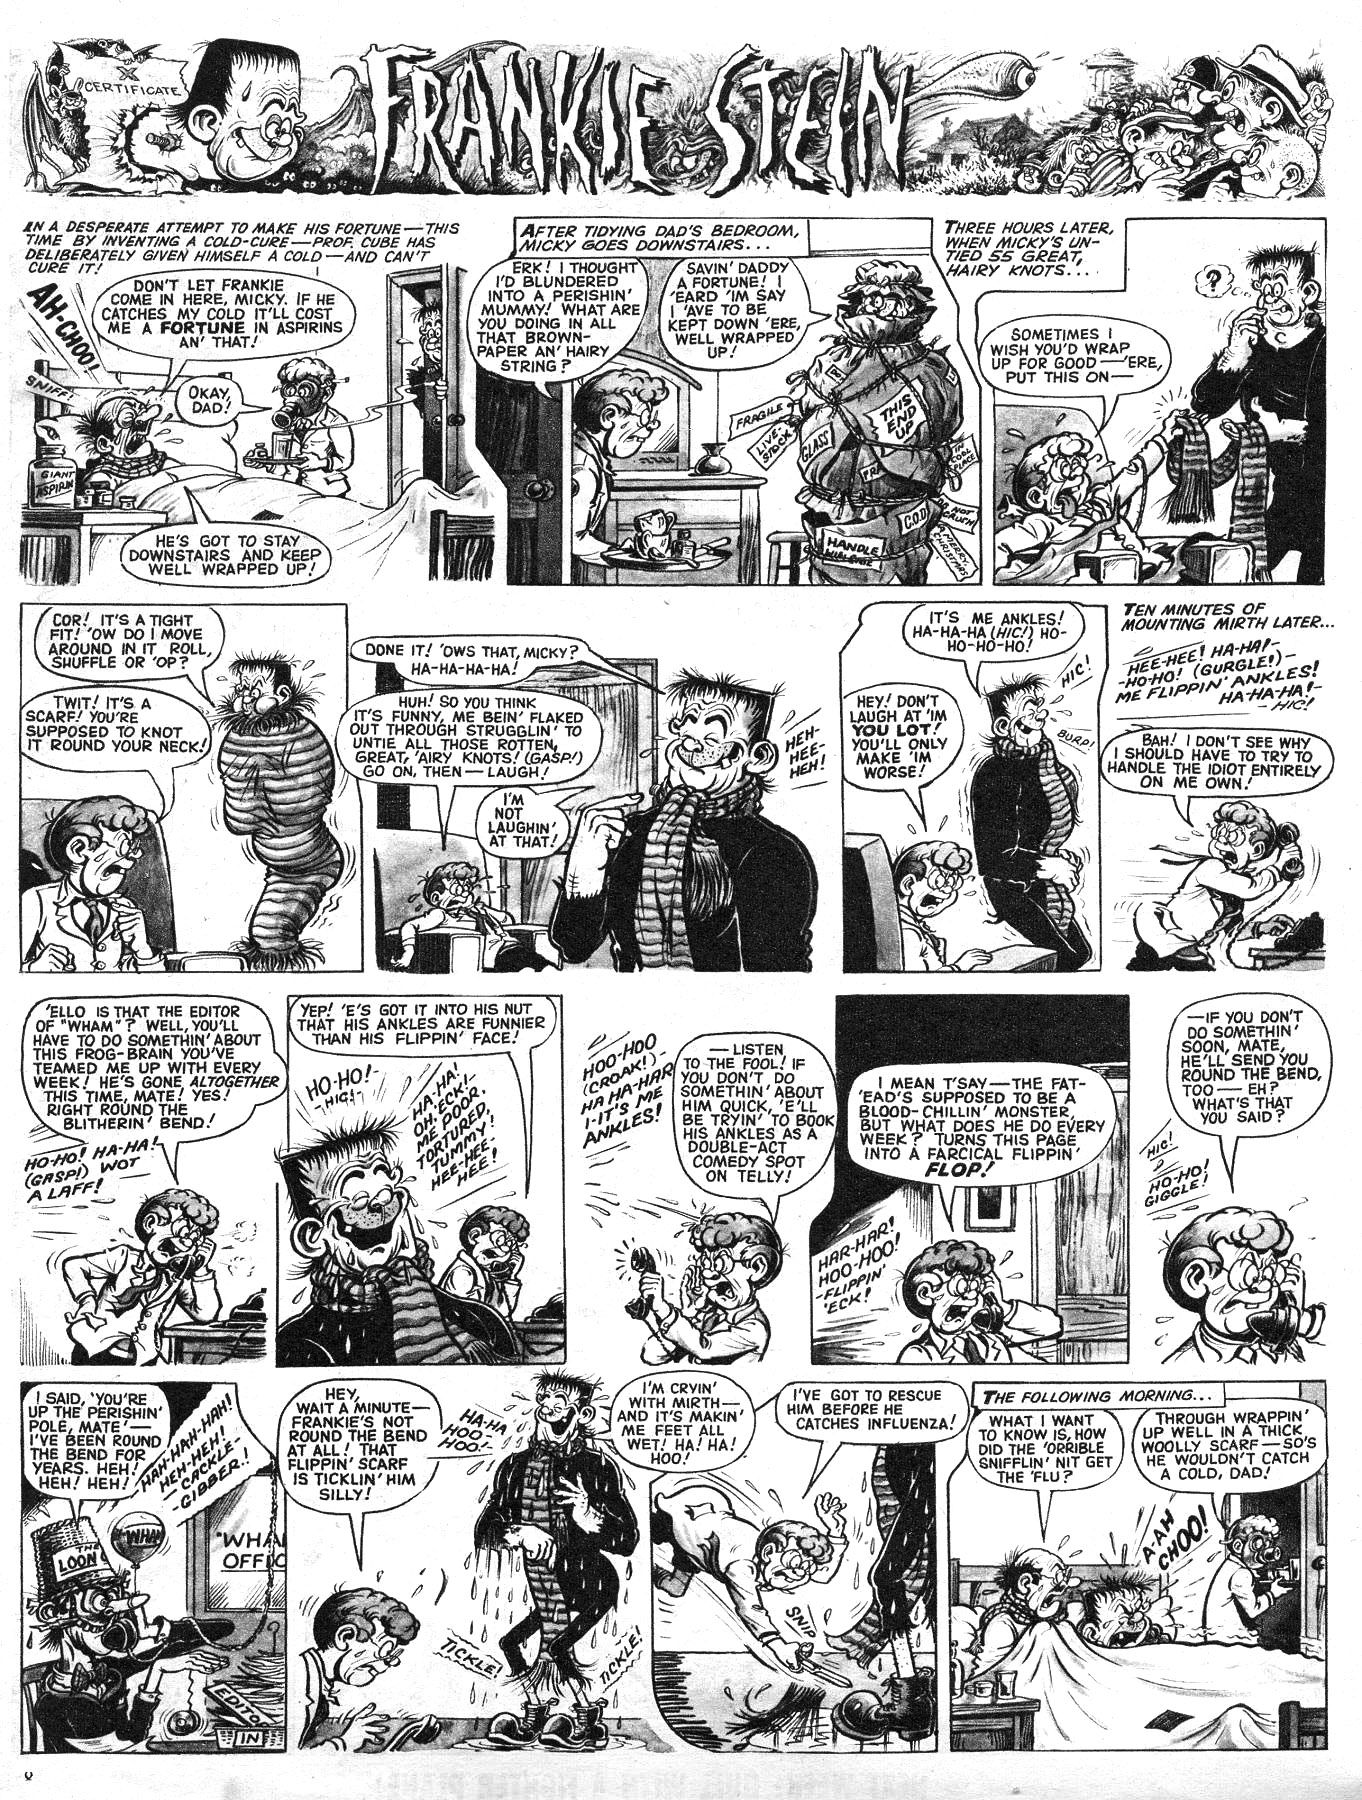 Frankie Stein strip from Wham! No. 82, cover dated 8th January 1966, drawn by Ken Reid. © TimeUK